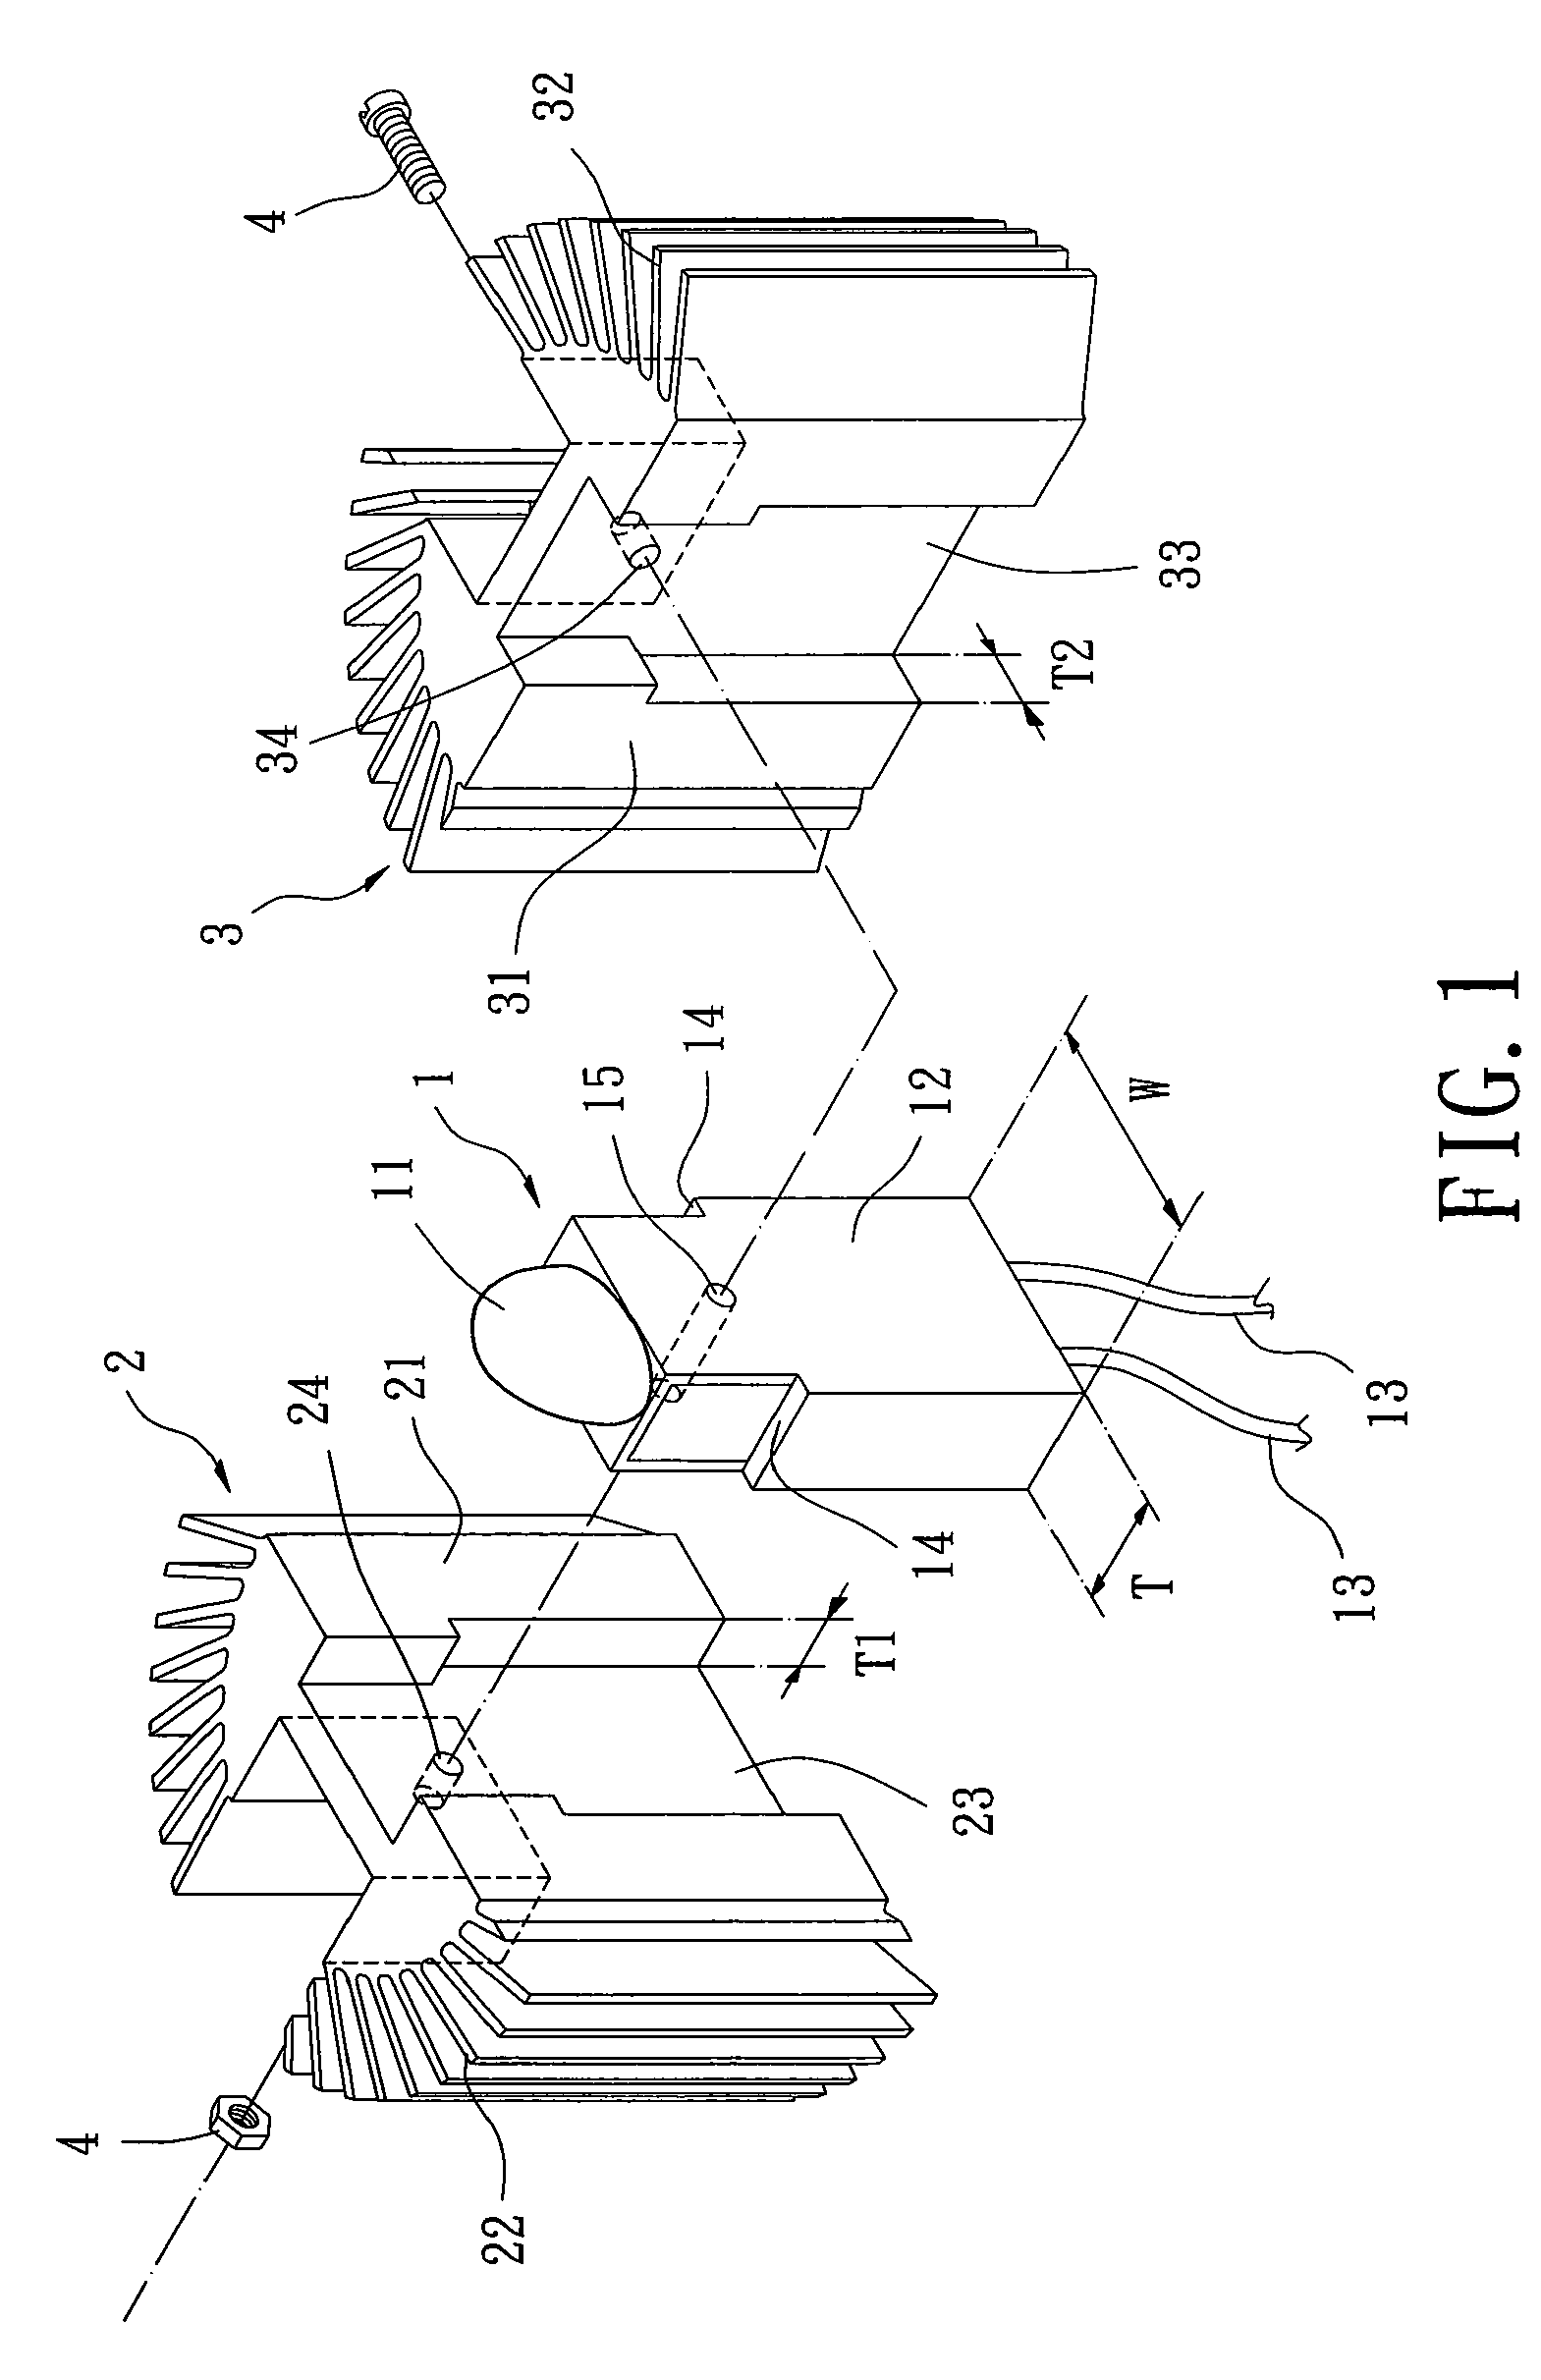 Light emitter with heat-dissipating module